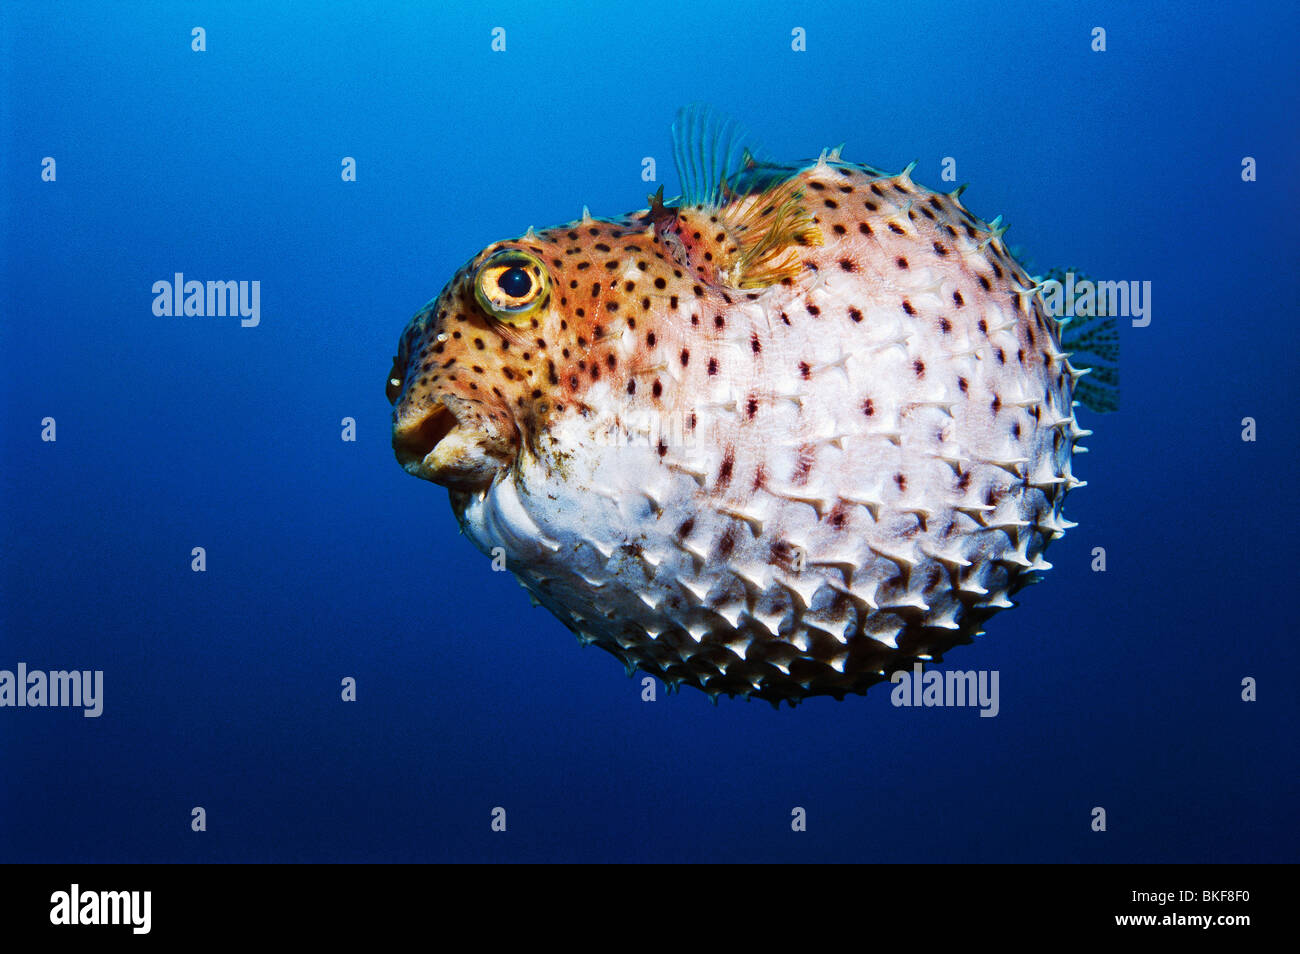 Inflated porcupinefish Stock Photo